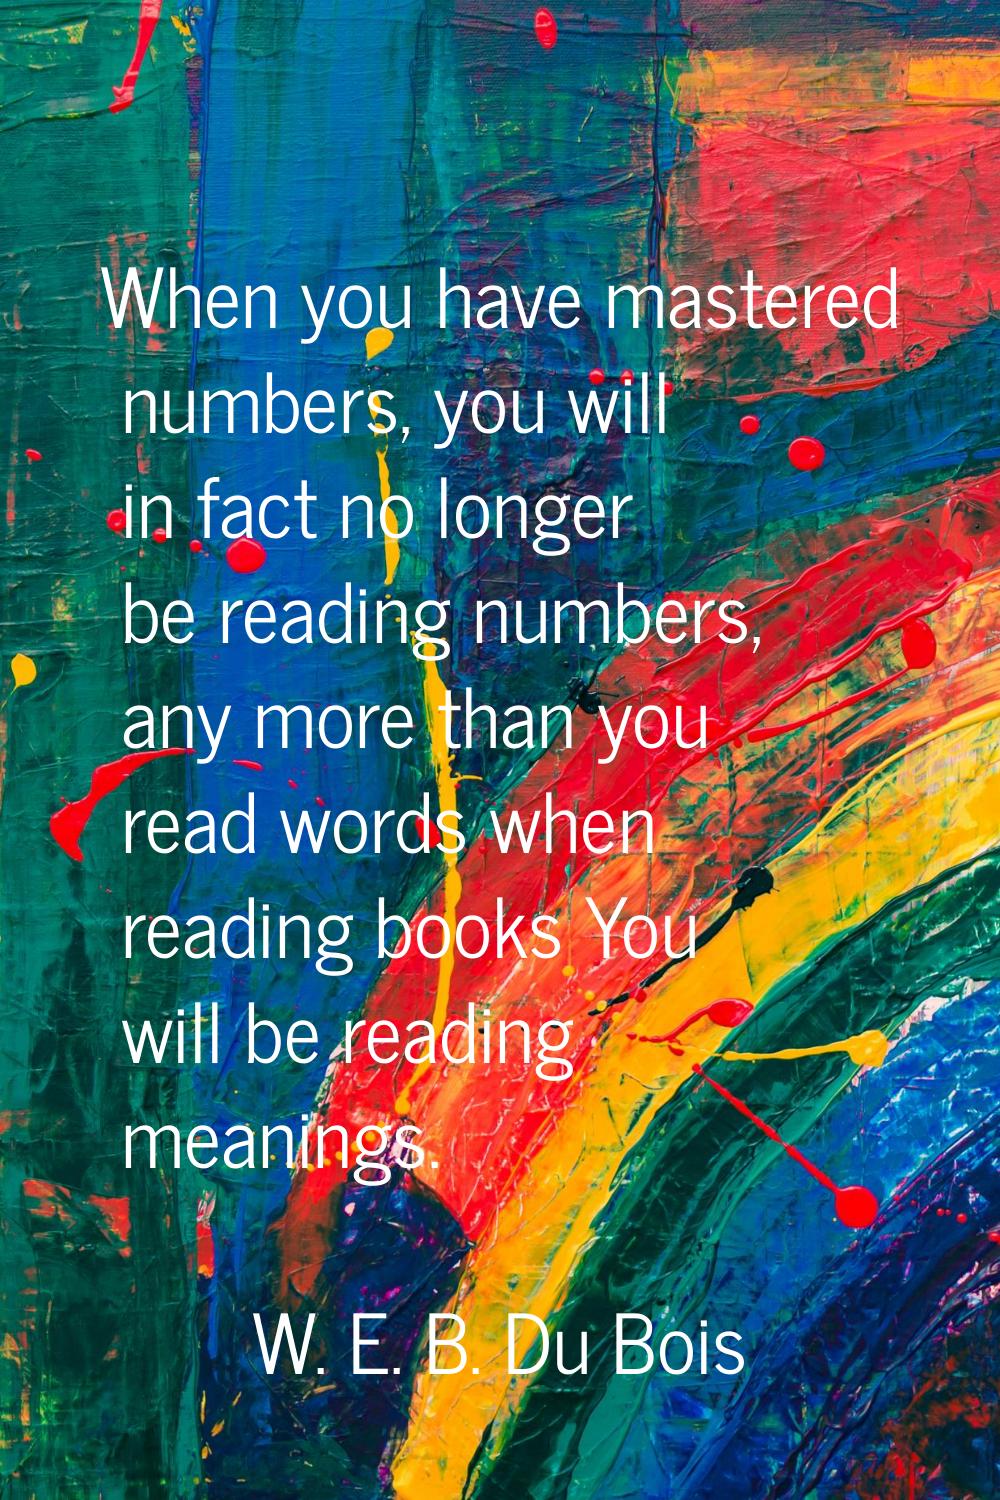 When you have mastered numbers, you will in fact no longer be reading numbers, any more than you re